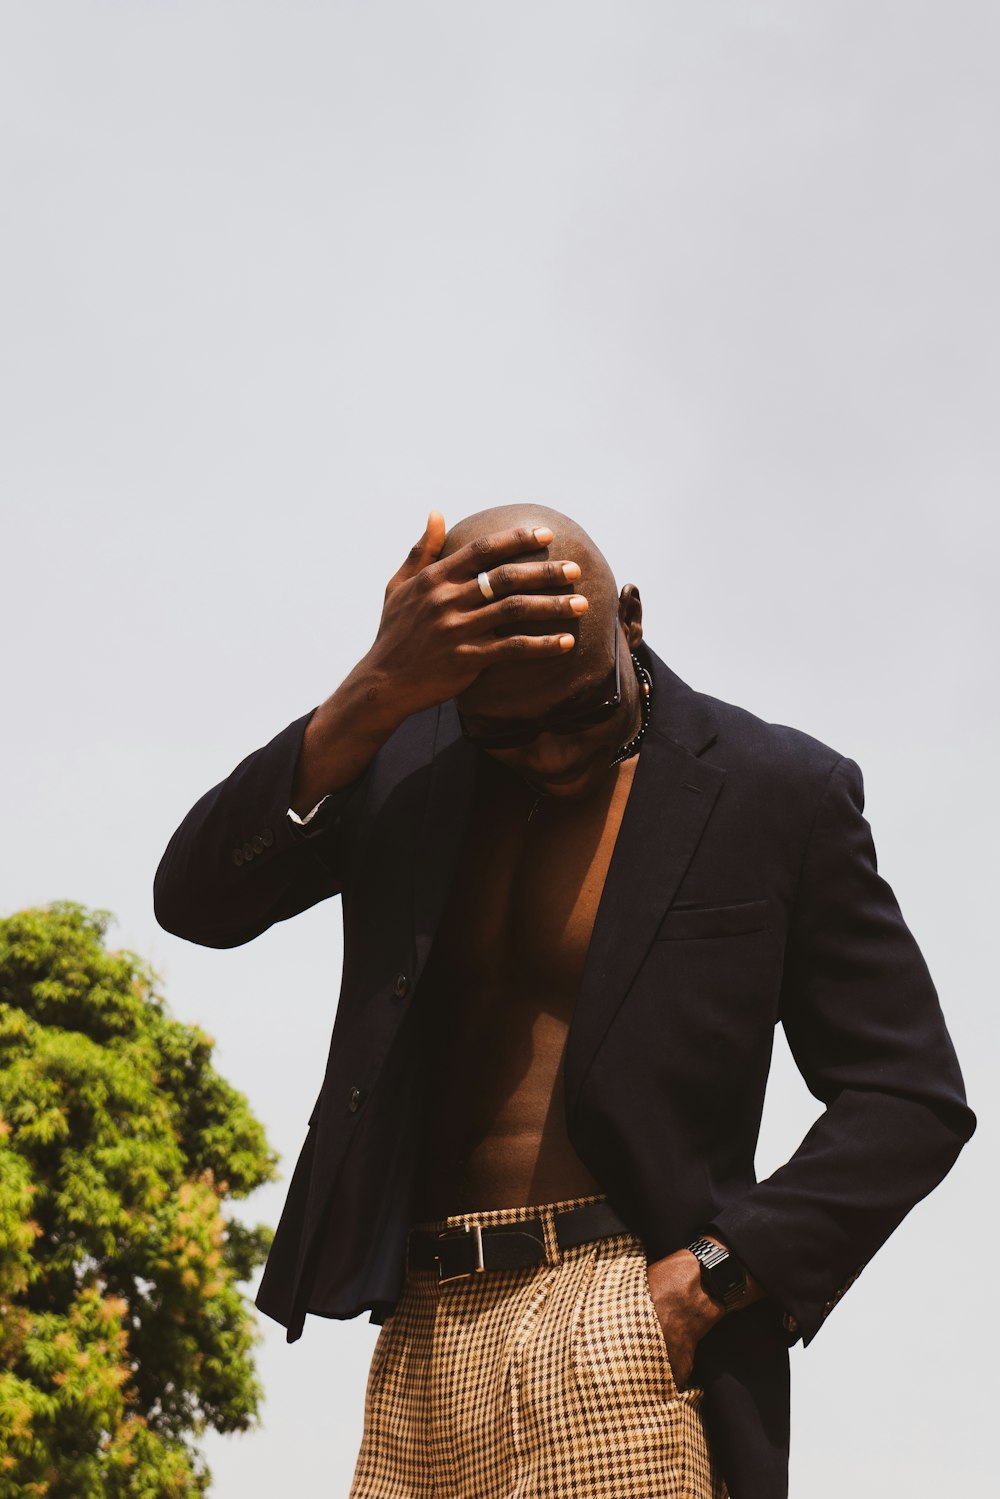 a man in a suit is covering his face with his hands